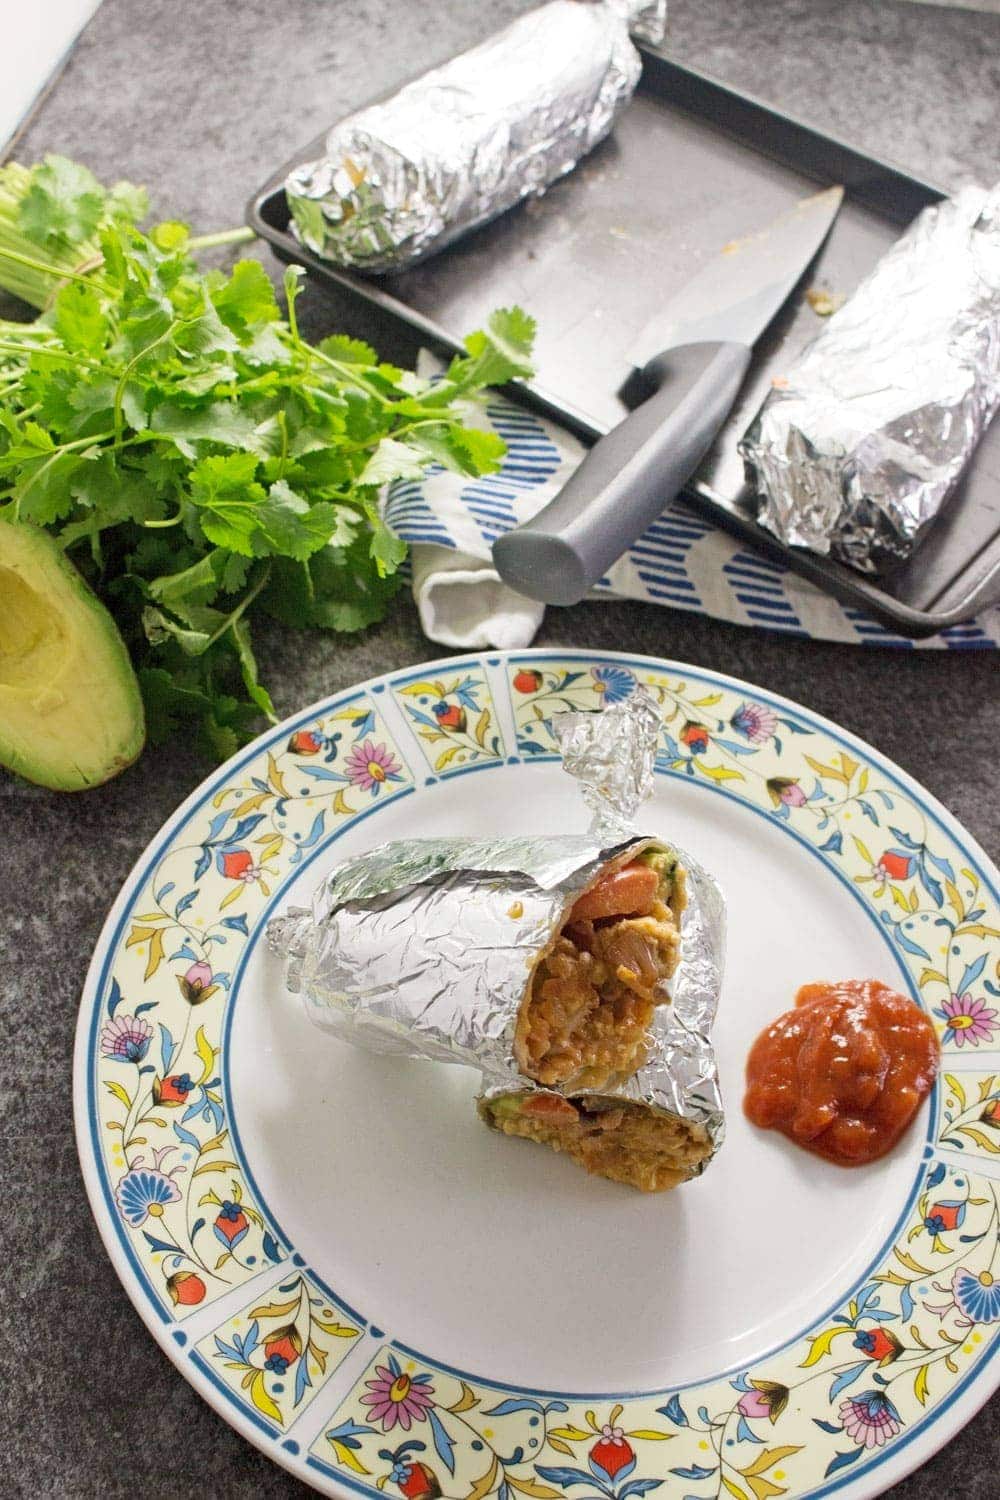 This breakfast burrito stuffed with bacon, egg and hash browns give you the perfect start to the day! They're an impressive but easy to make breakfast.